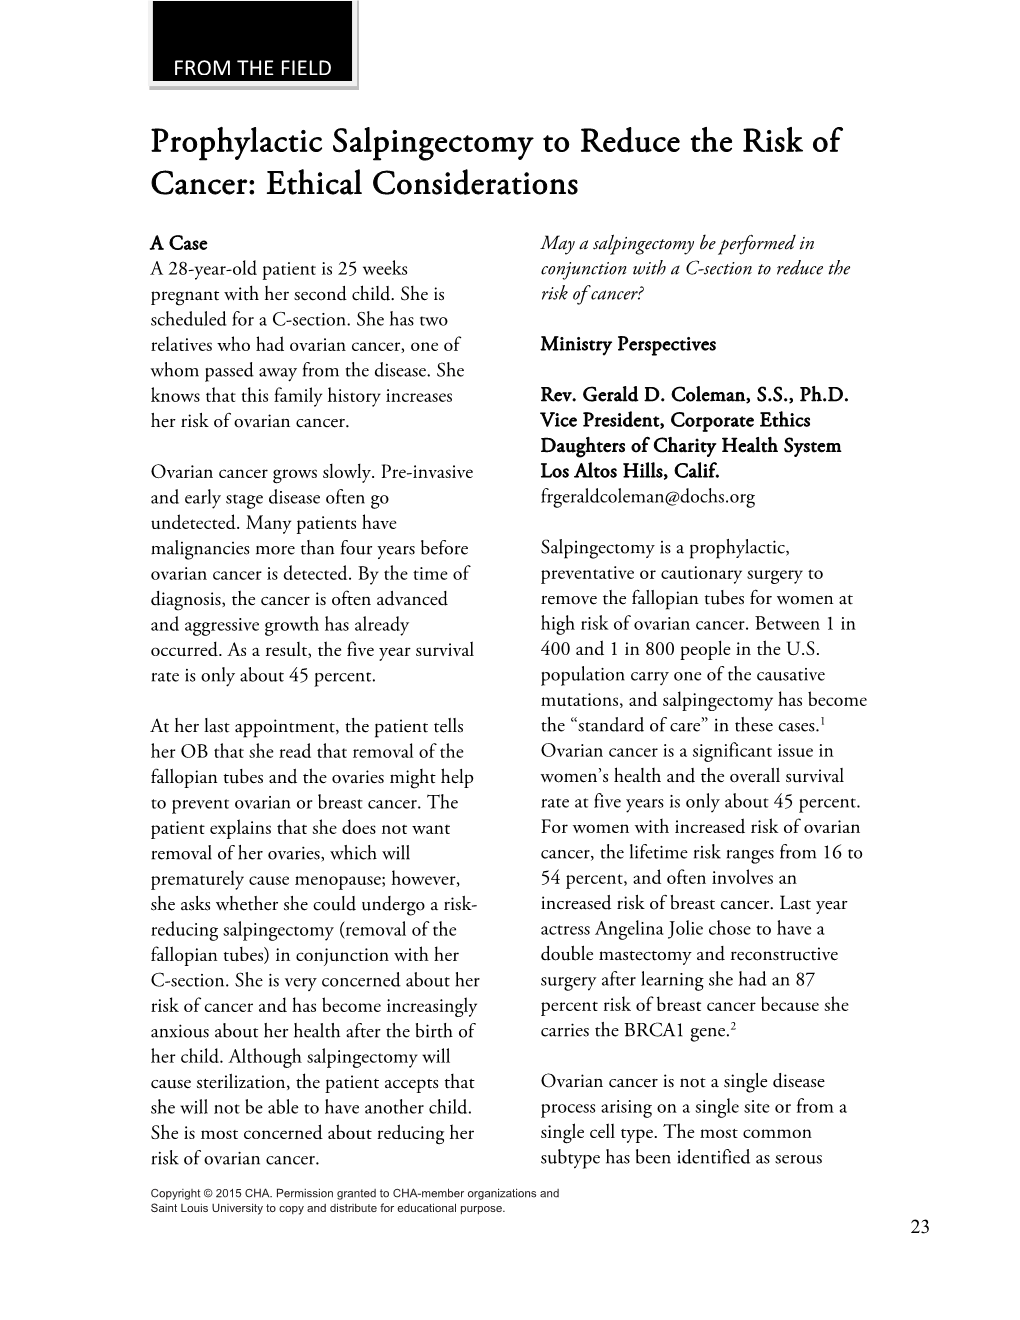 Prophylactic Salpingectomy to Reduce the Risk of Cancer: Ethical Considerations